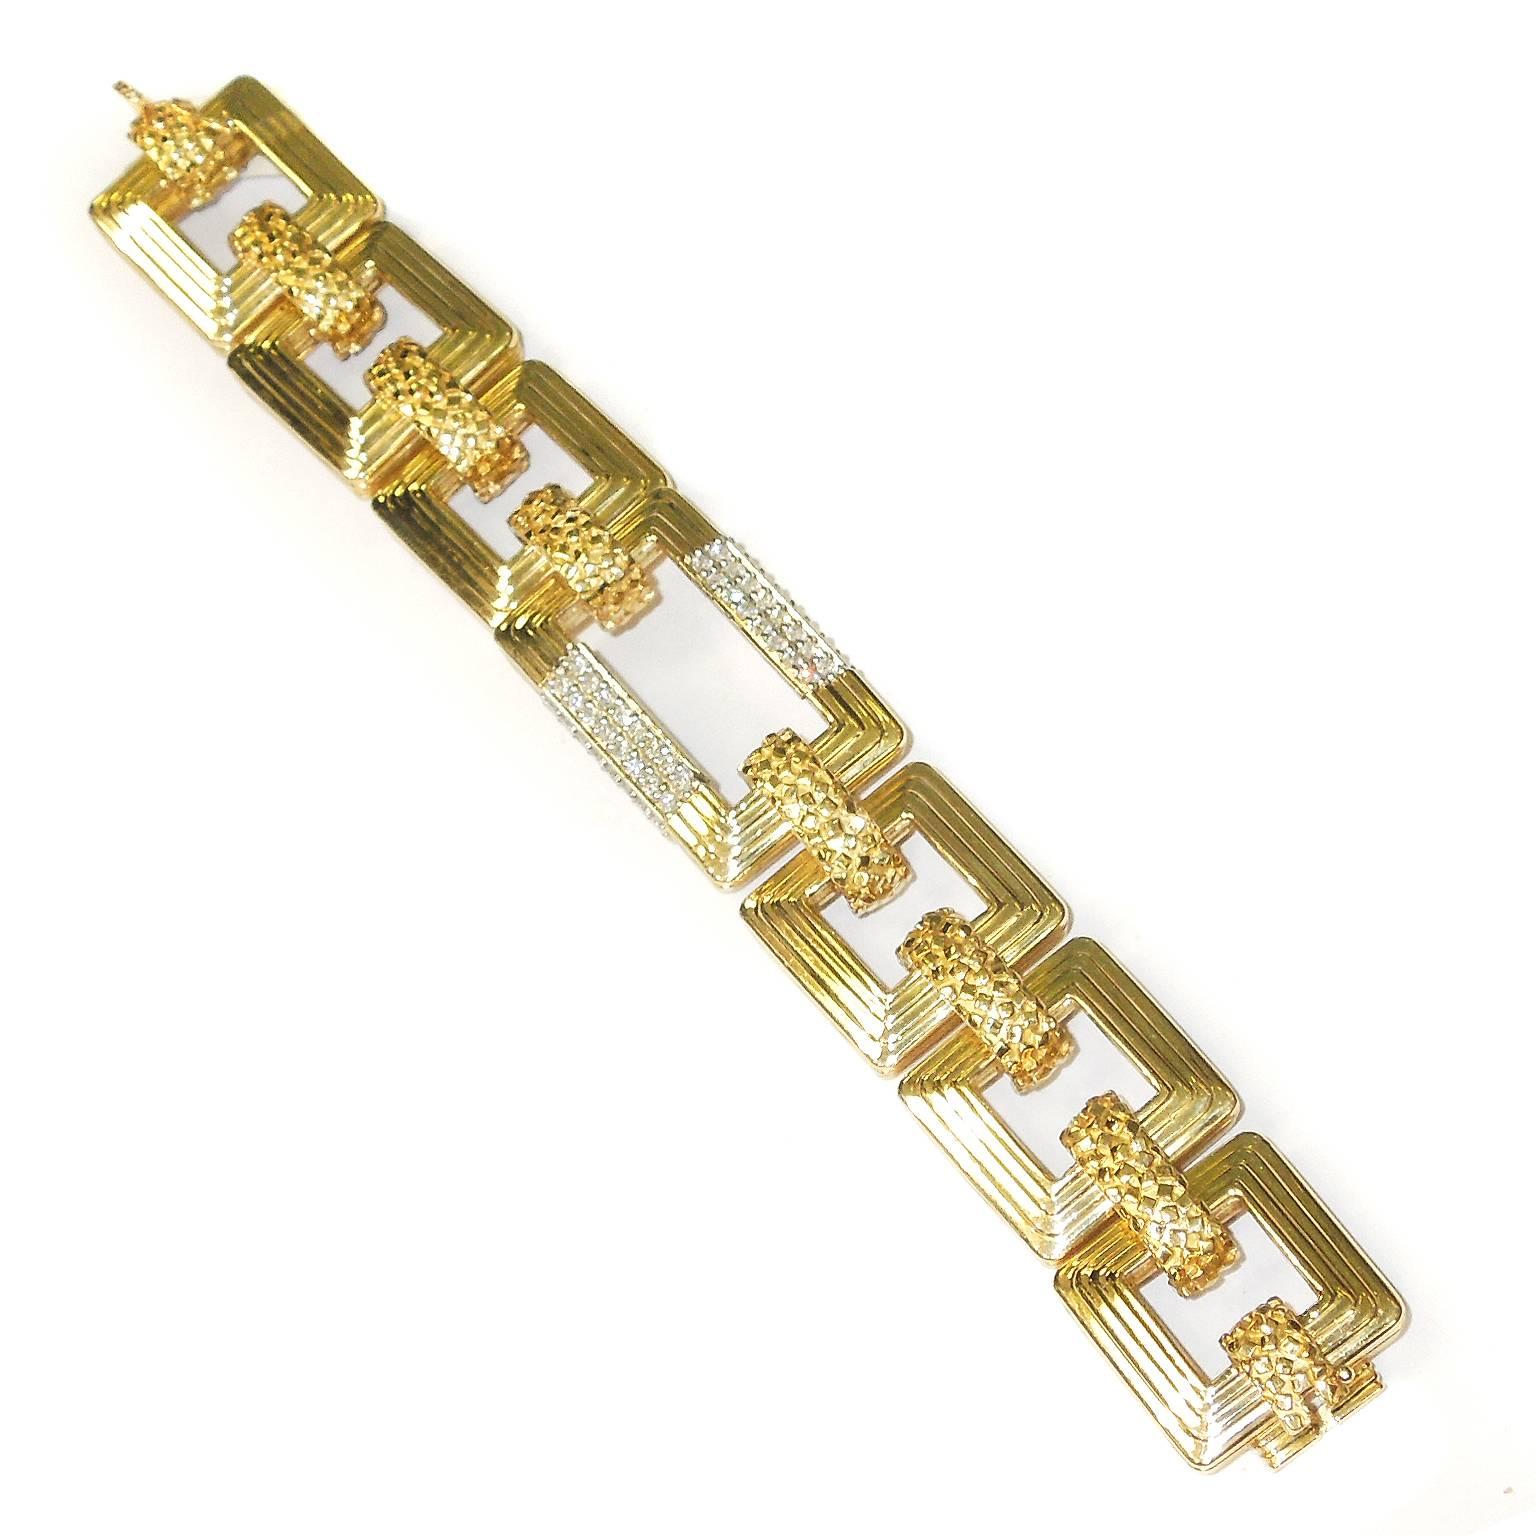 18K Yellow Gold Bracelet with Diamonds

Apprx. 2.00ct. Diamonds on center link of bracelet

Bracelet is 7 inches in length and 0.9 inch wide

Also is very heavy, 126 grams

Very safe clasp, clicks in.

Estate 